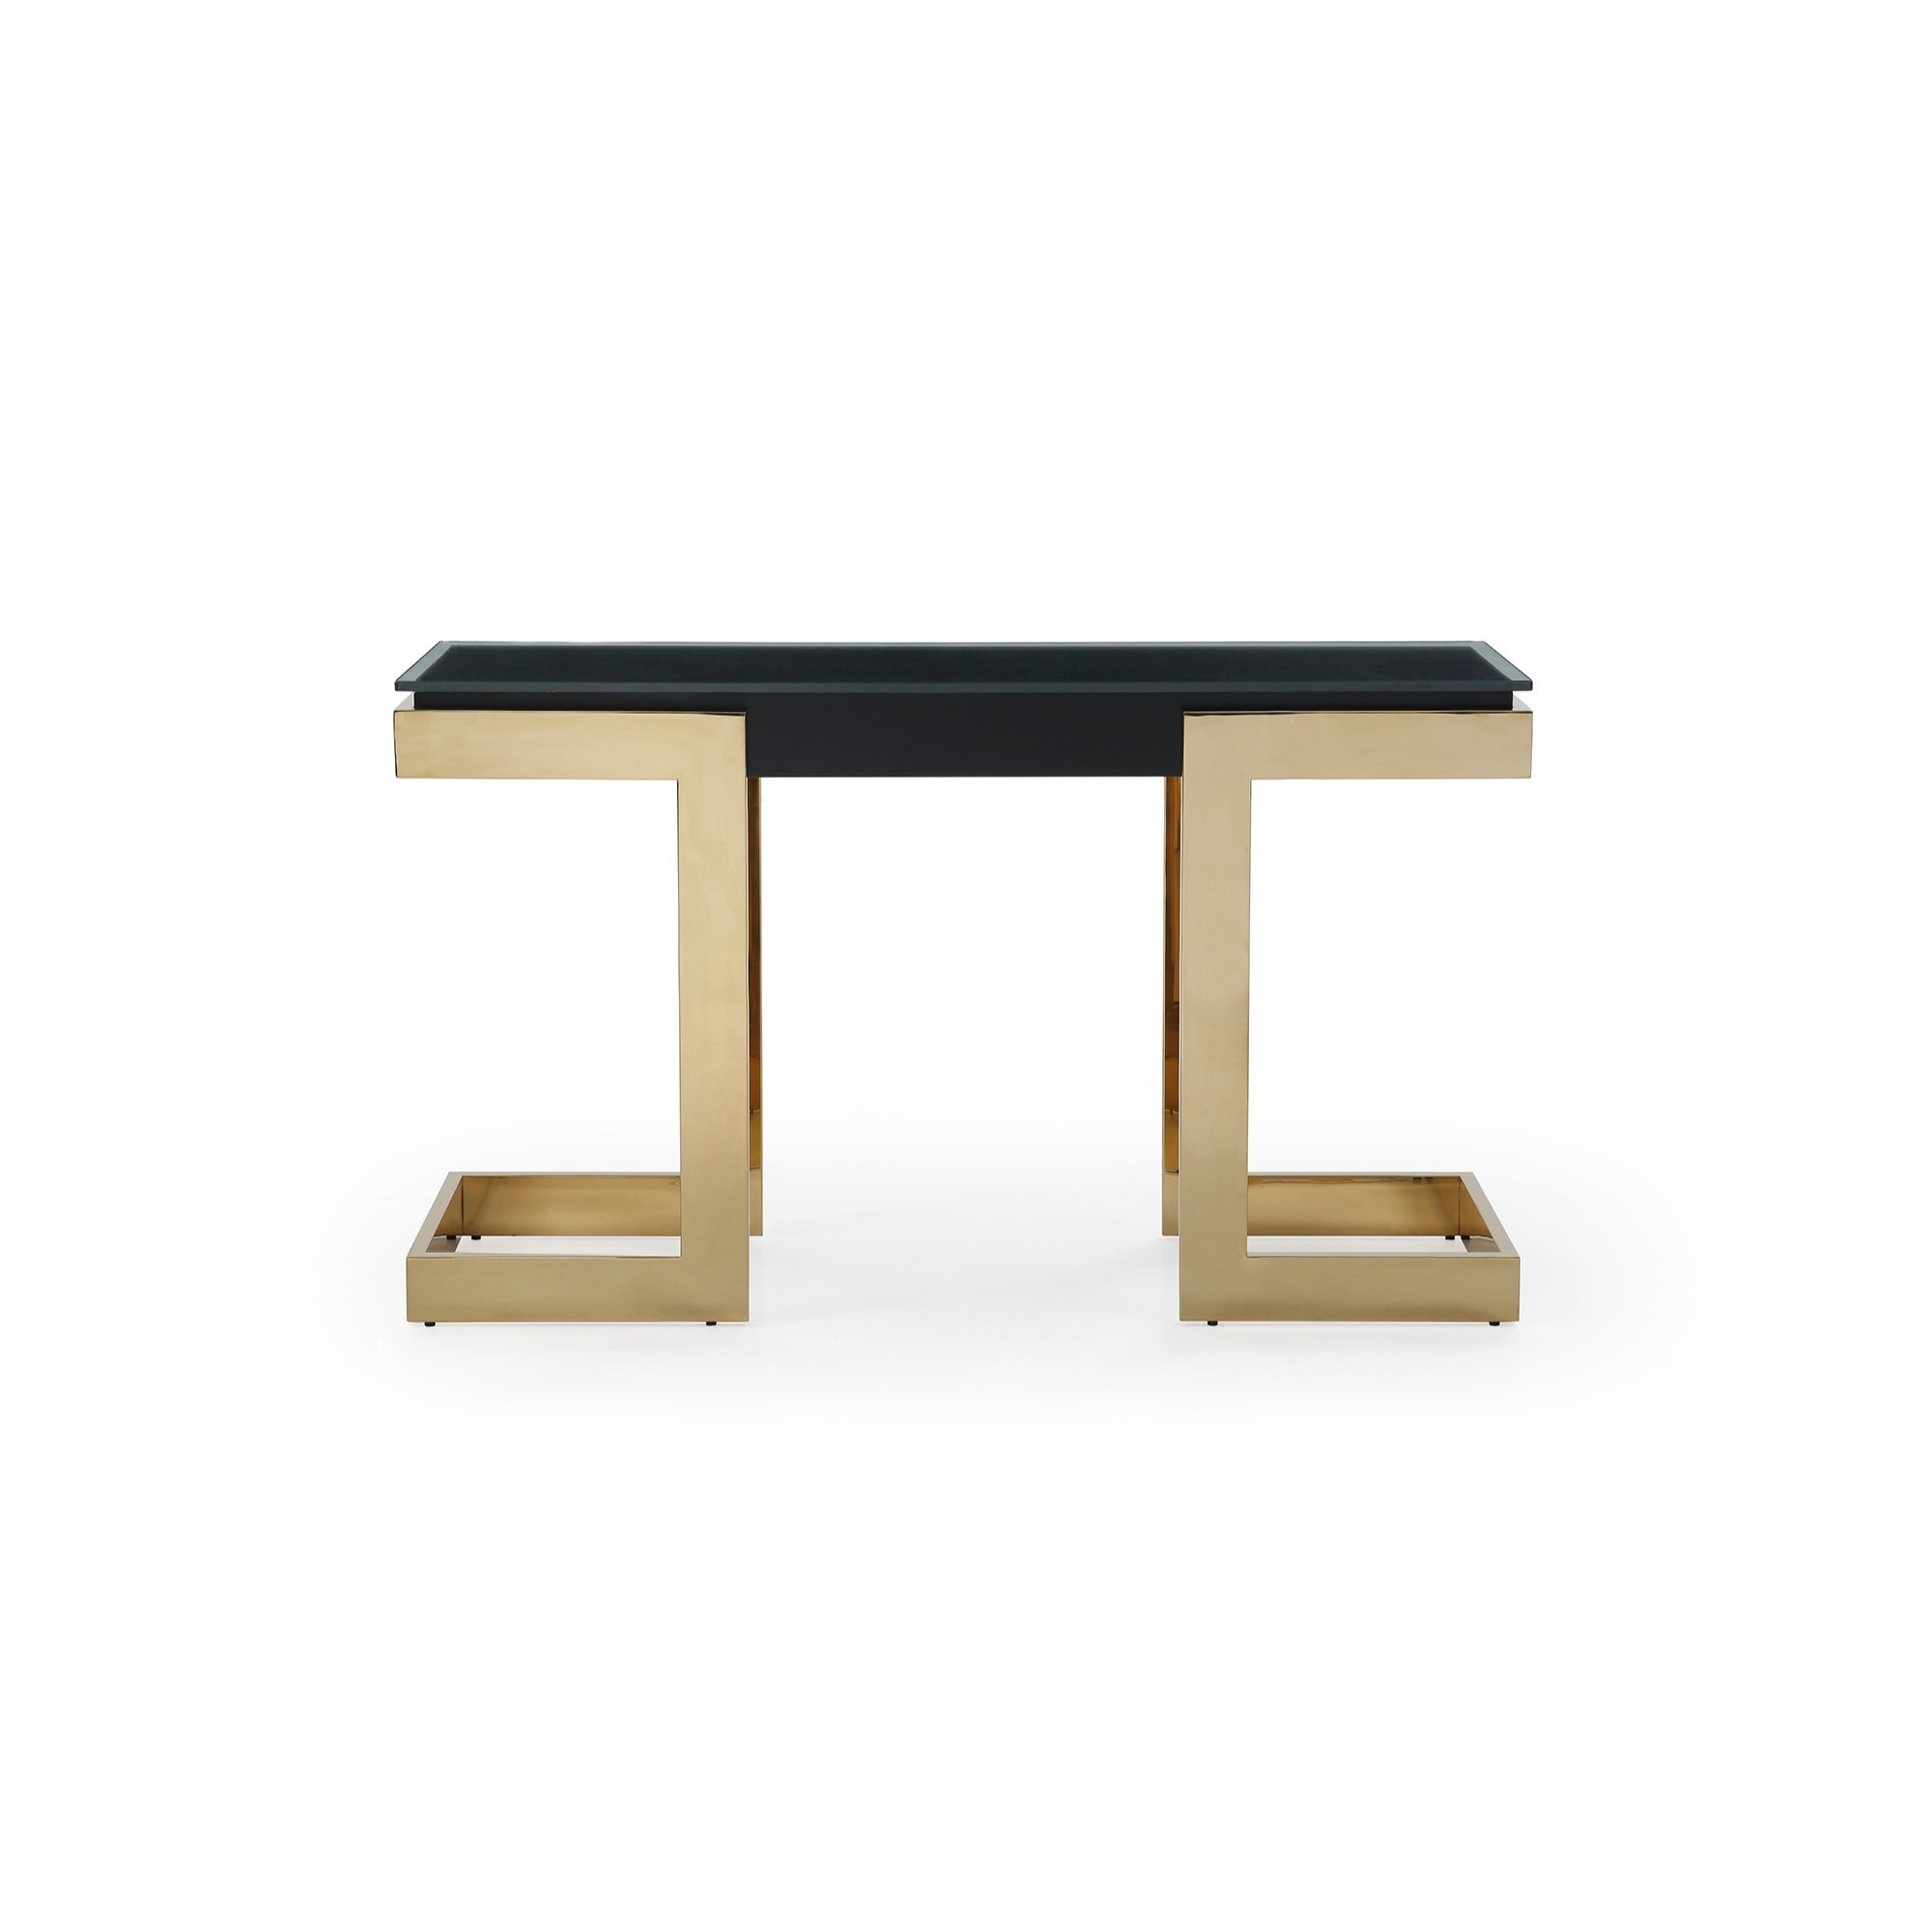 Sumo Console, 10mm glass top, Connector in black, Polished gold stainless base. - image 4 of 4